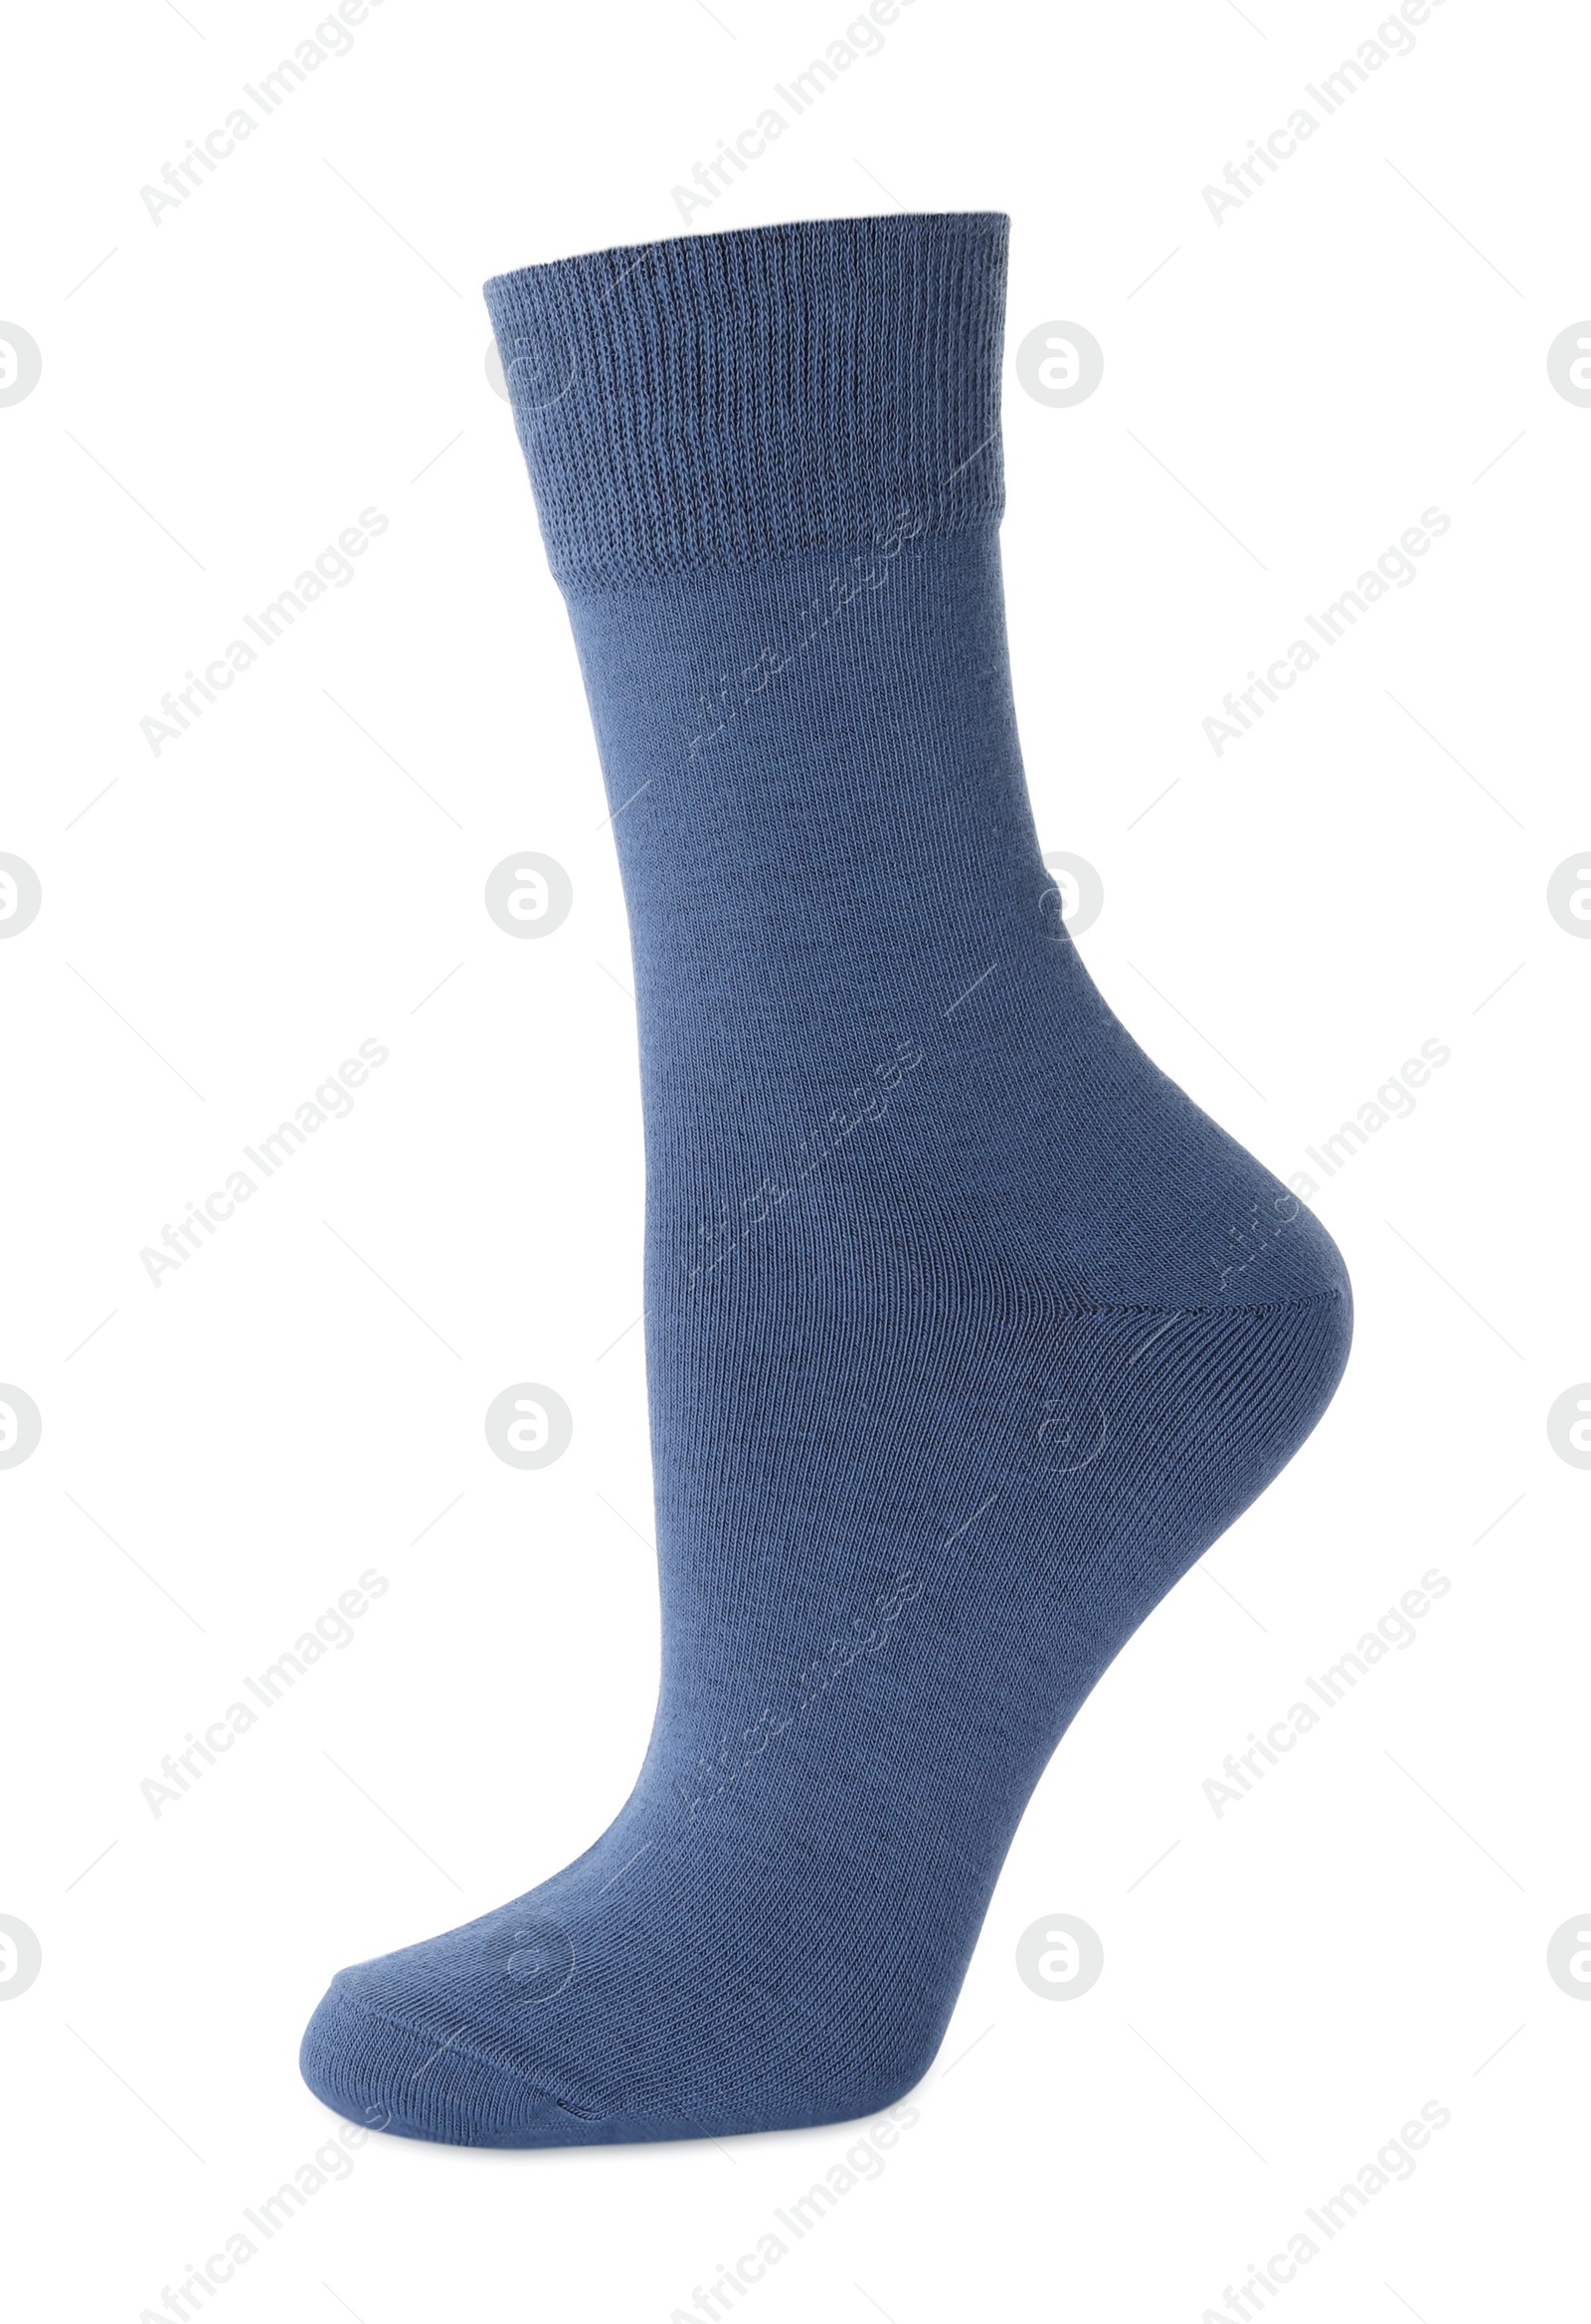 Photo of One new dark blue sock isolated on white